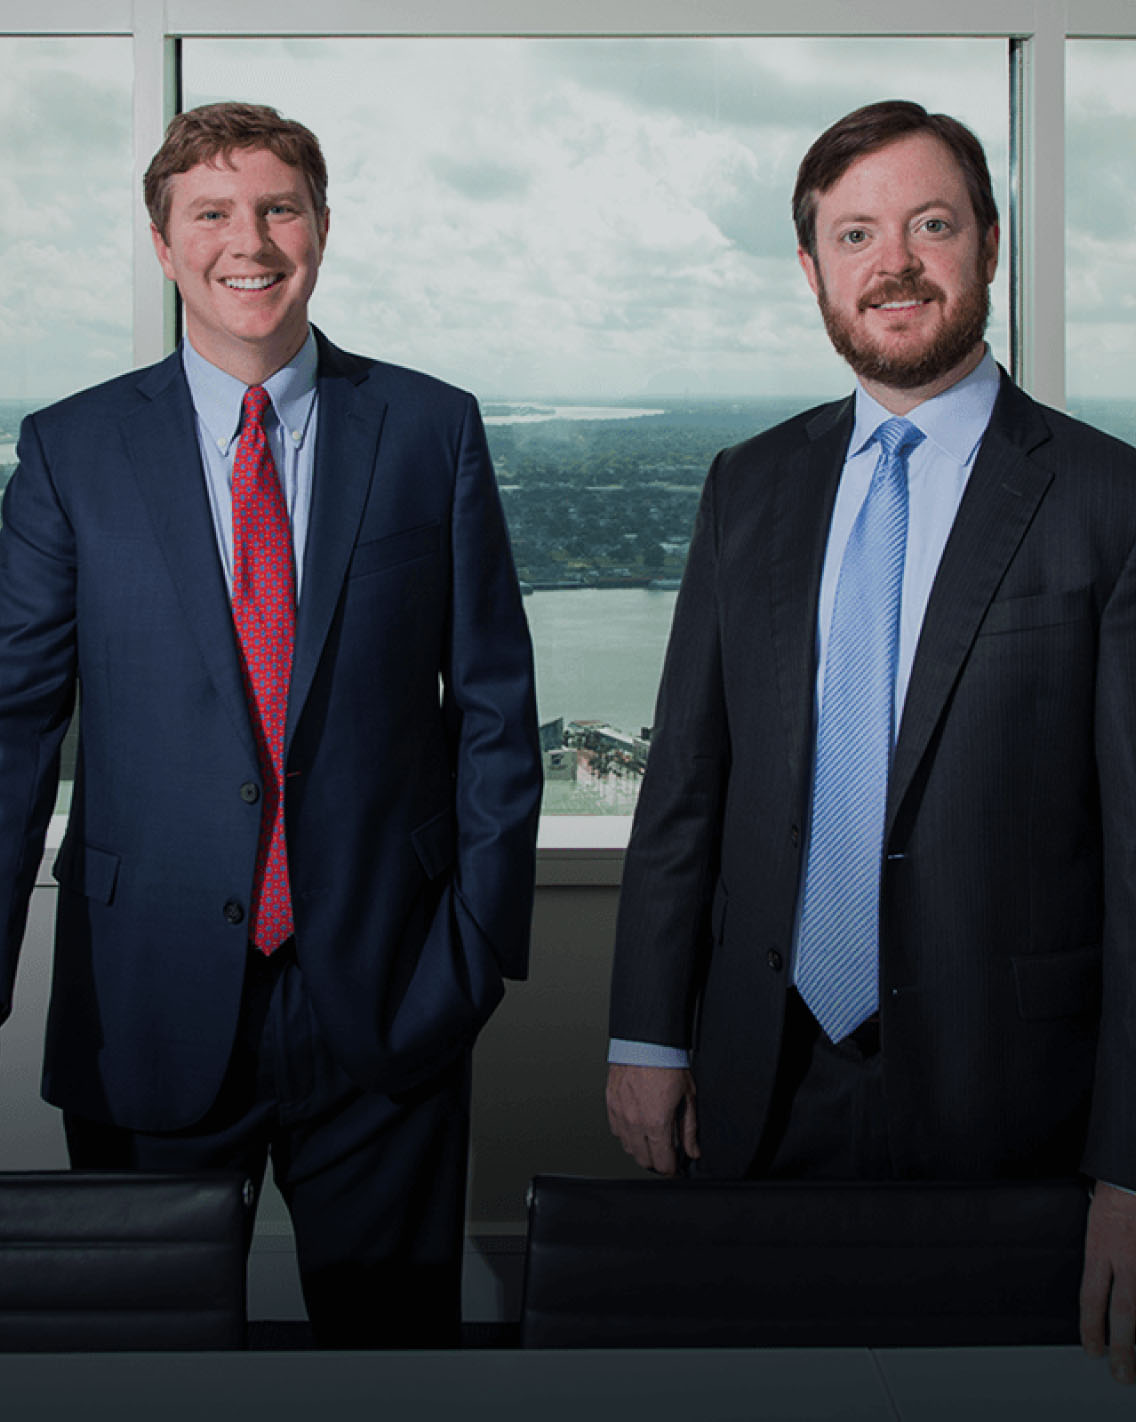 Two attorneys in suits, Lance McCardle and Jason W. Burge, stand in front of high rise office window with view of river below